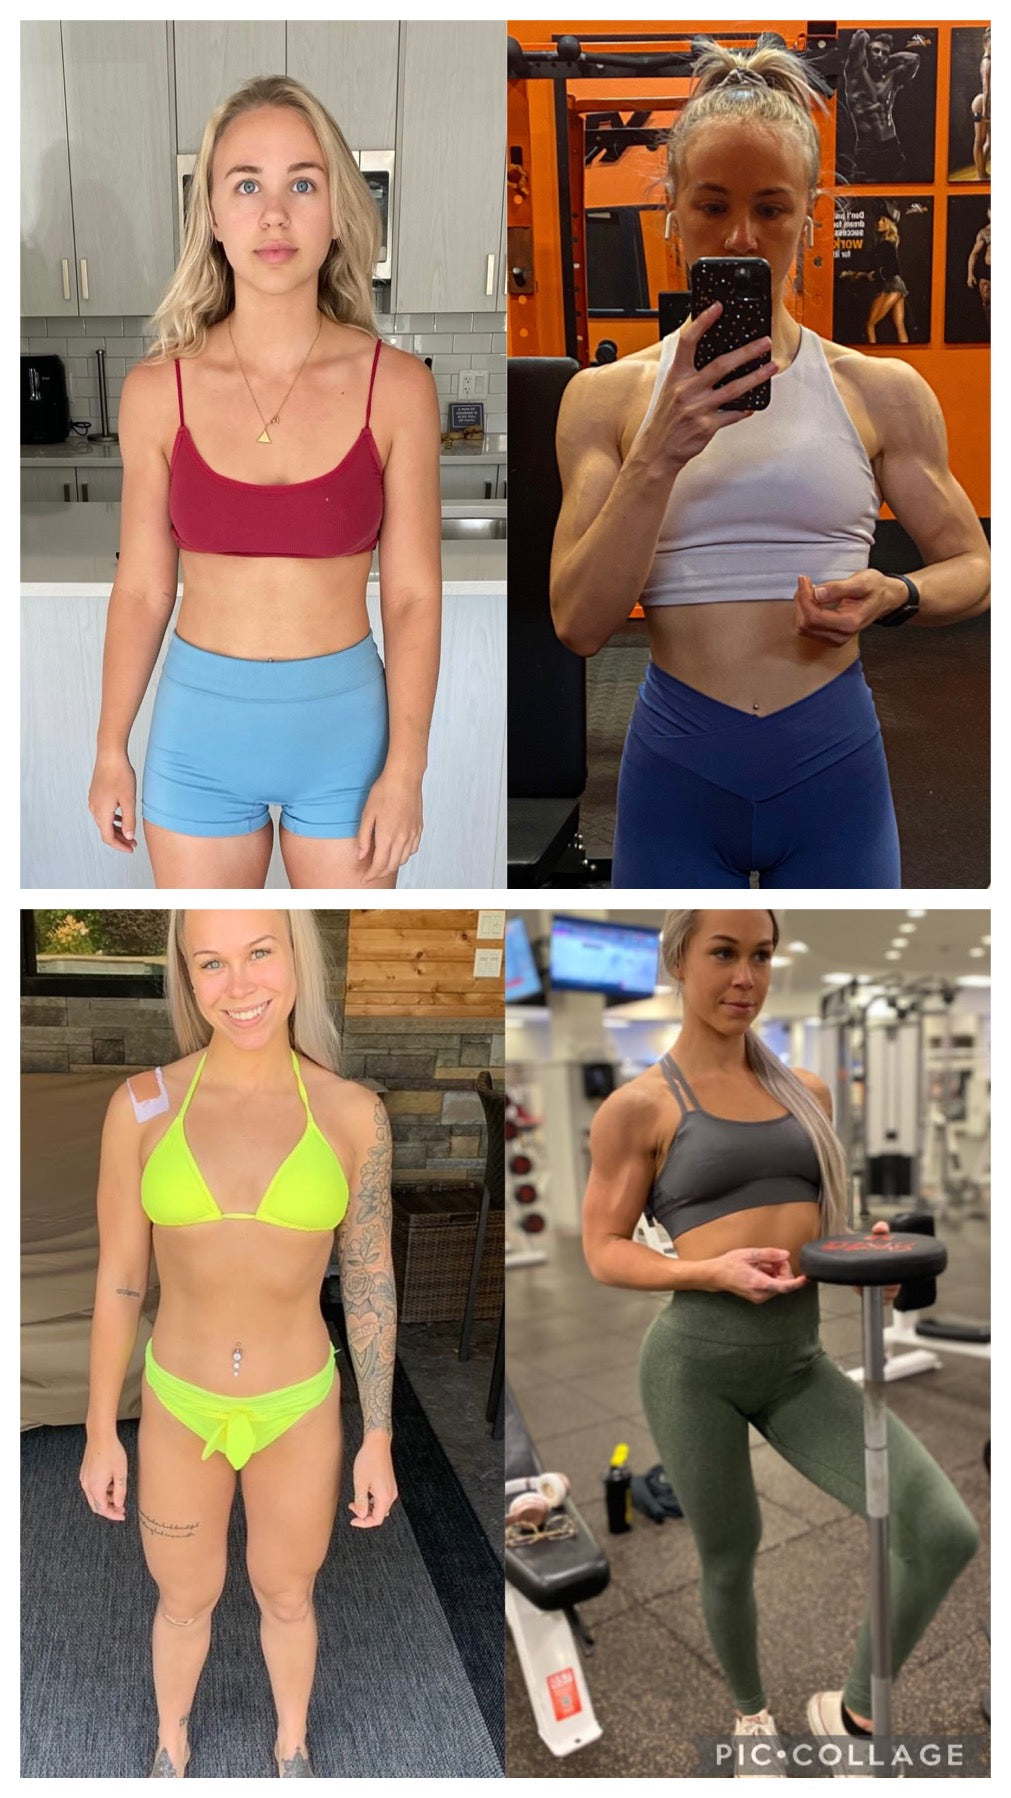 Compilation of two women who have all gone through health and body improvements at the DeMelo Fitness gym. These two women have prioritized muscle gain and have figures to prove it.